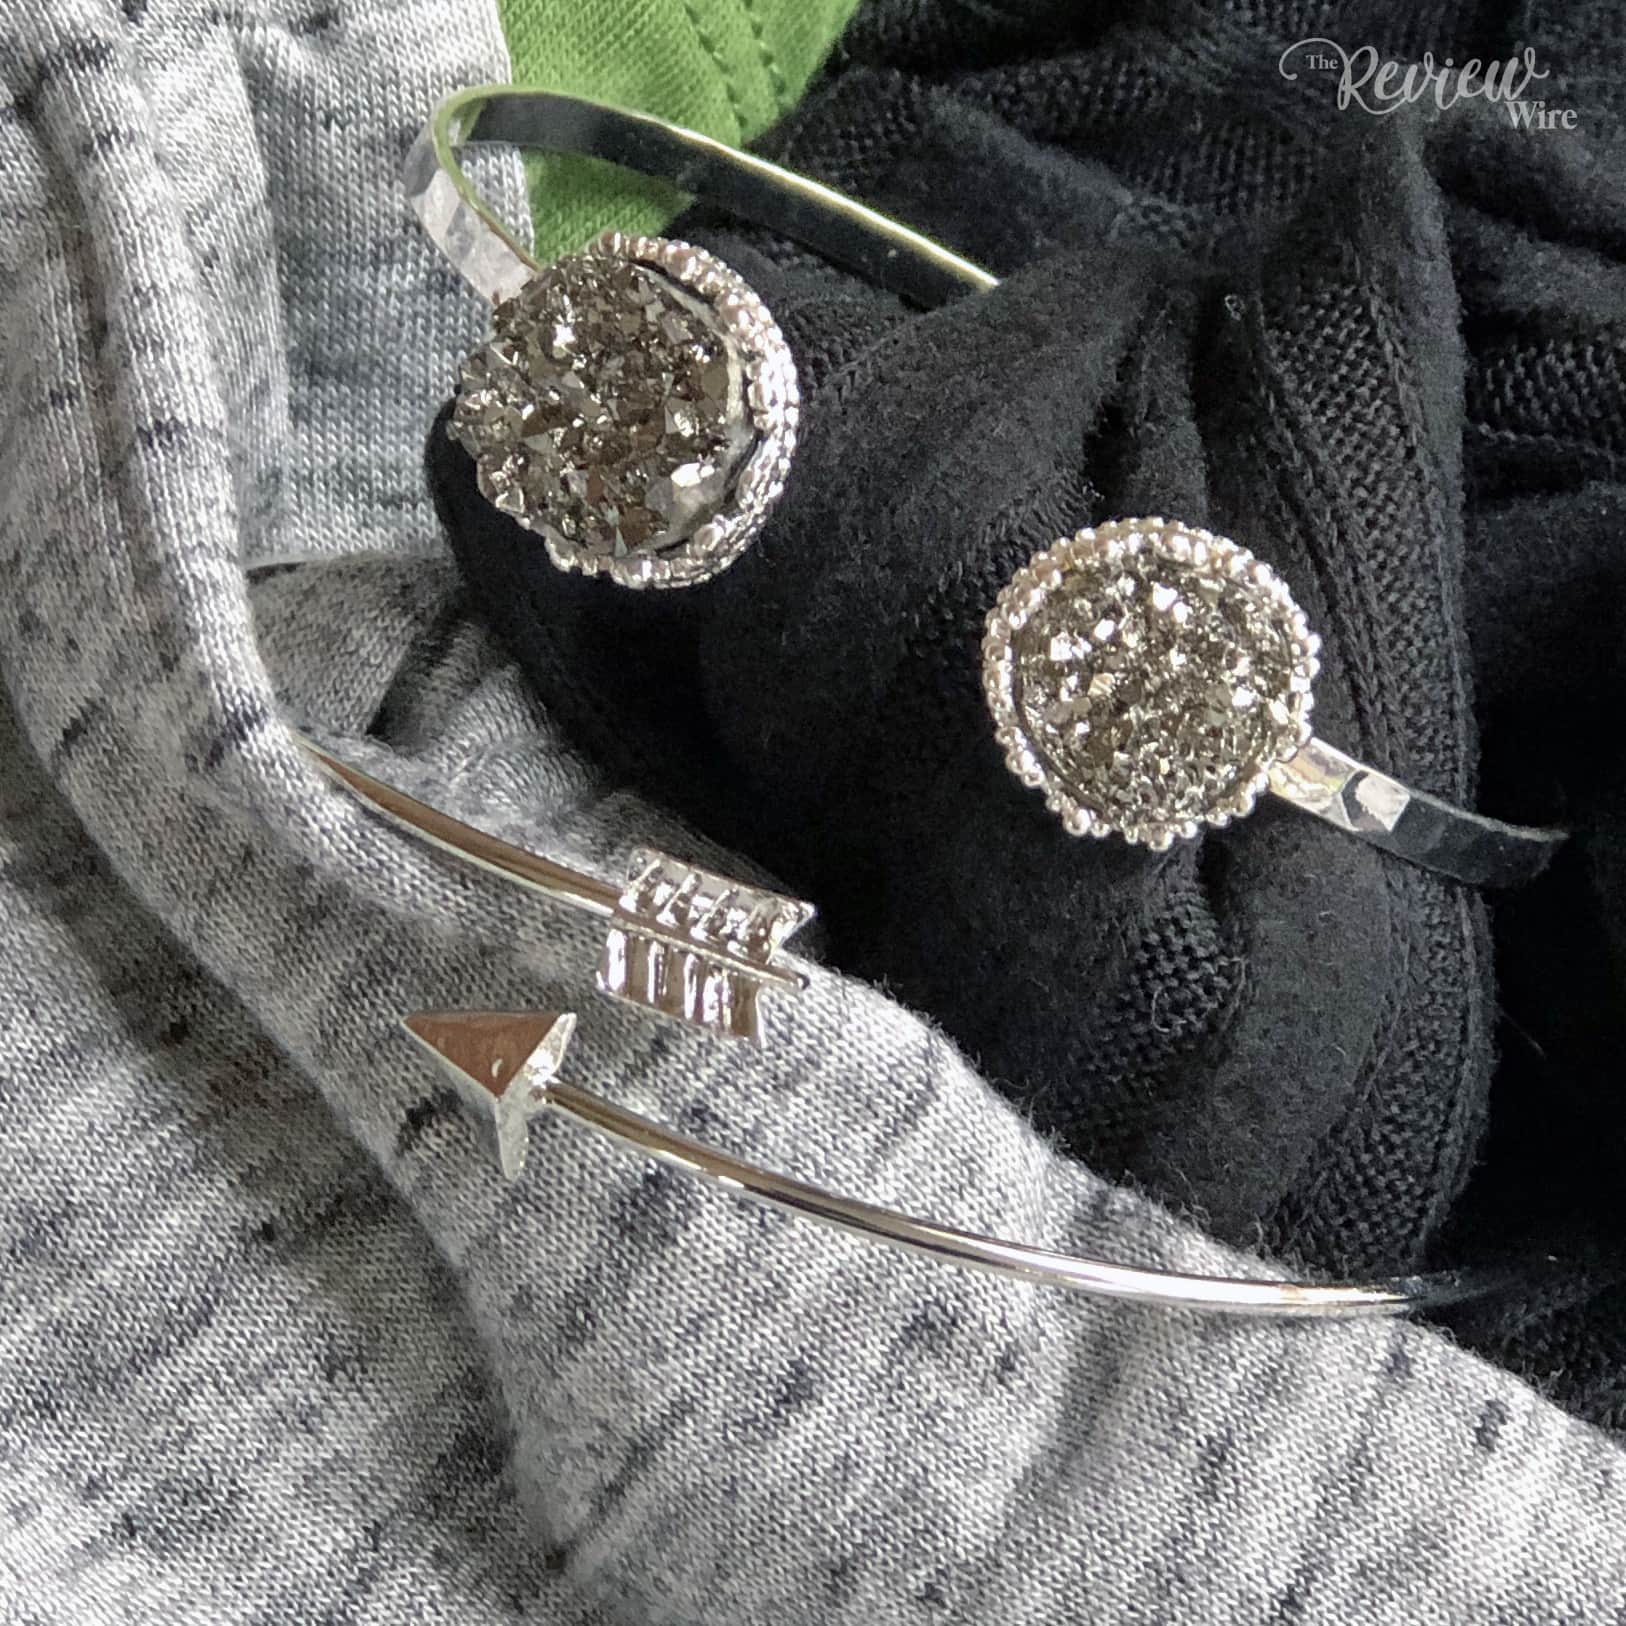 The Review Wire: February 2019 Nadine West Jewelry